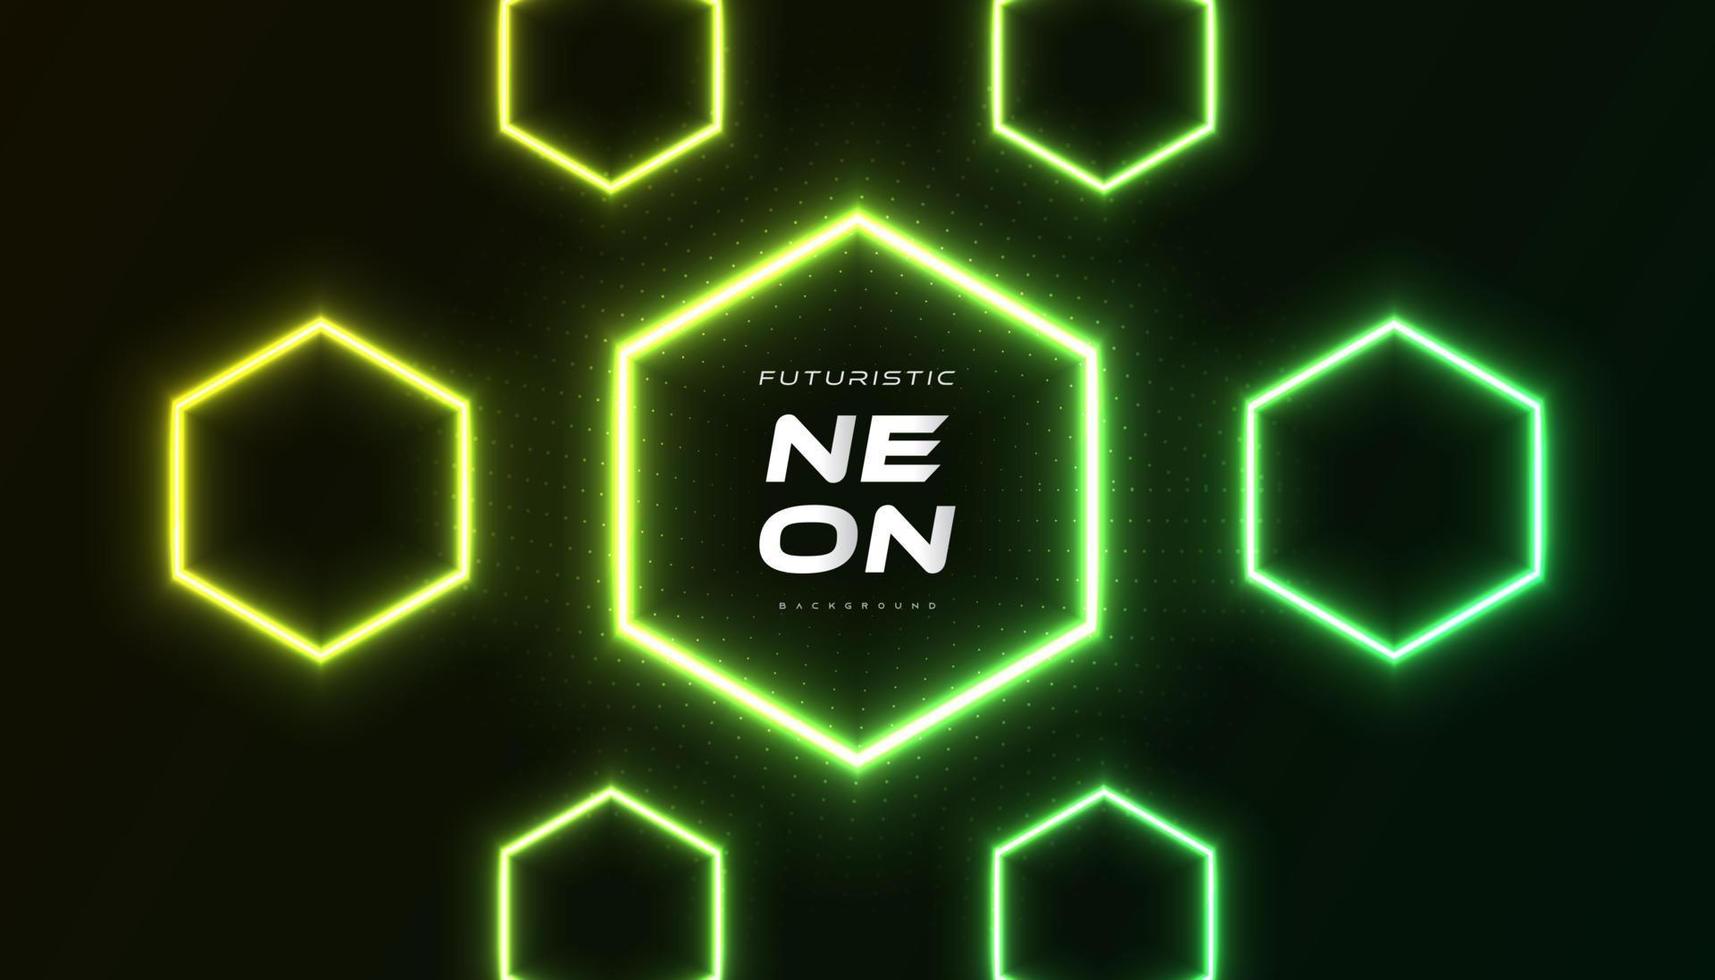 Modern Futuristic Sci-Fi Background with Glowing Hexagon Neon Shapes in Green and Yellow with Halftone Style Isolated on Dark Background vector